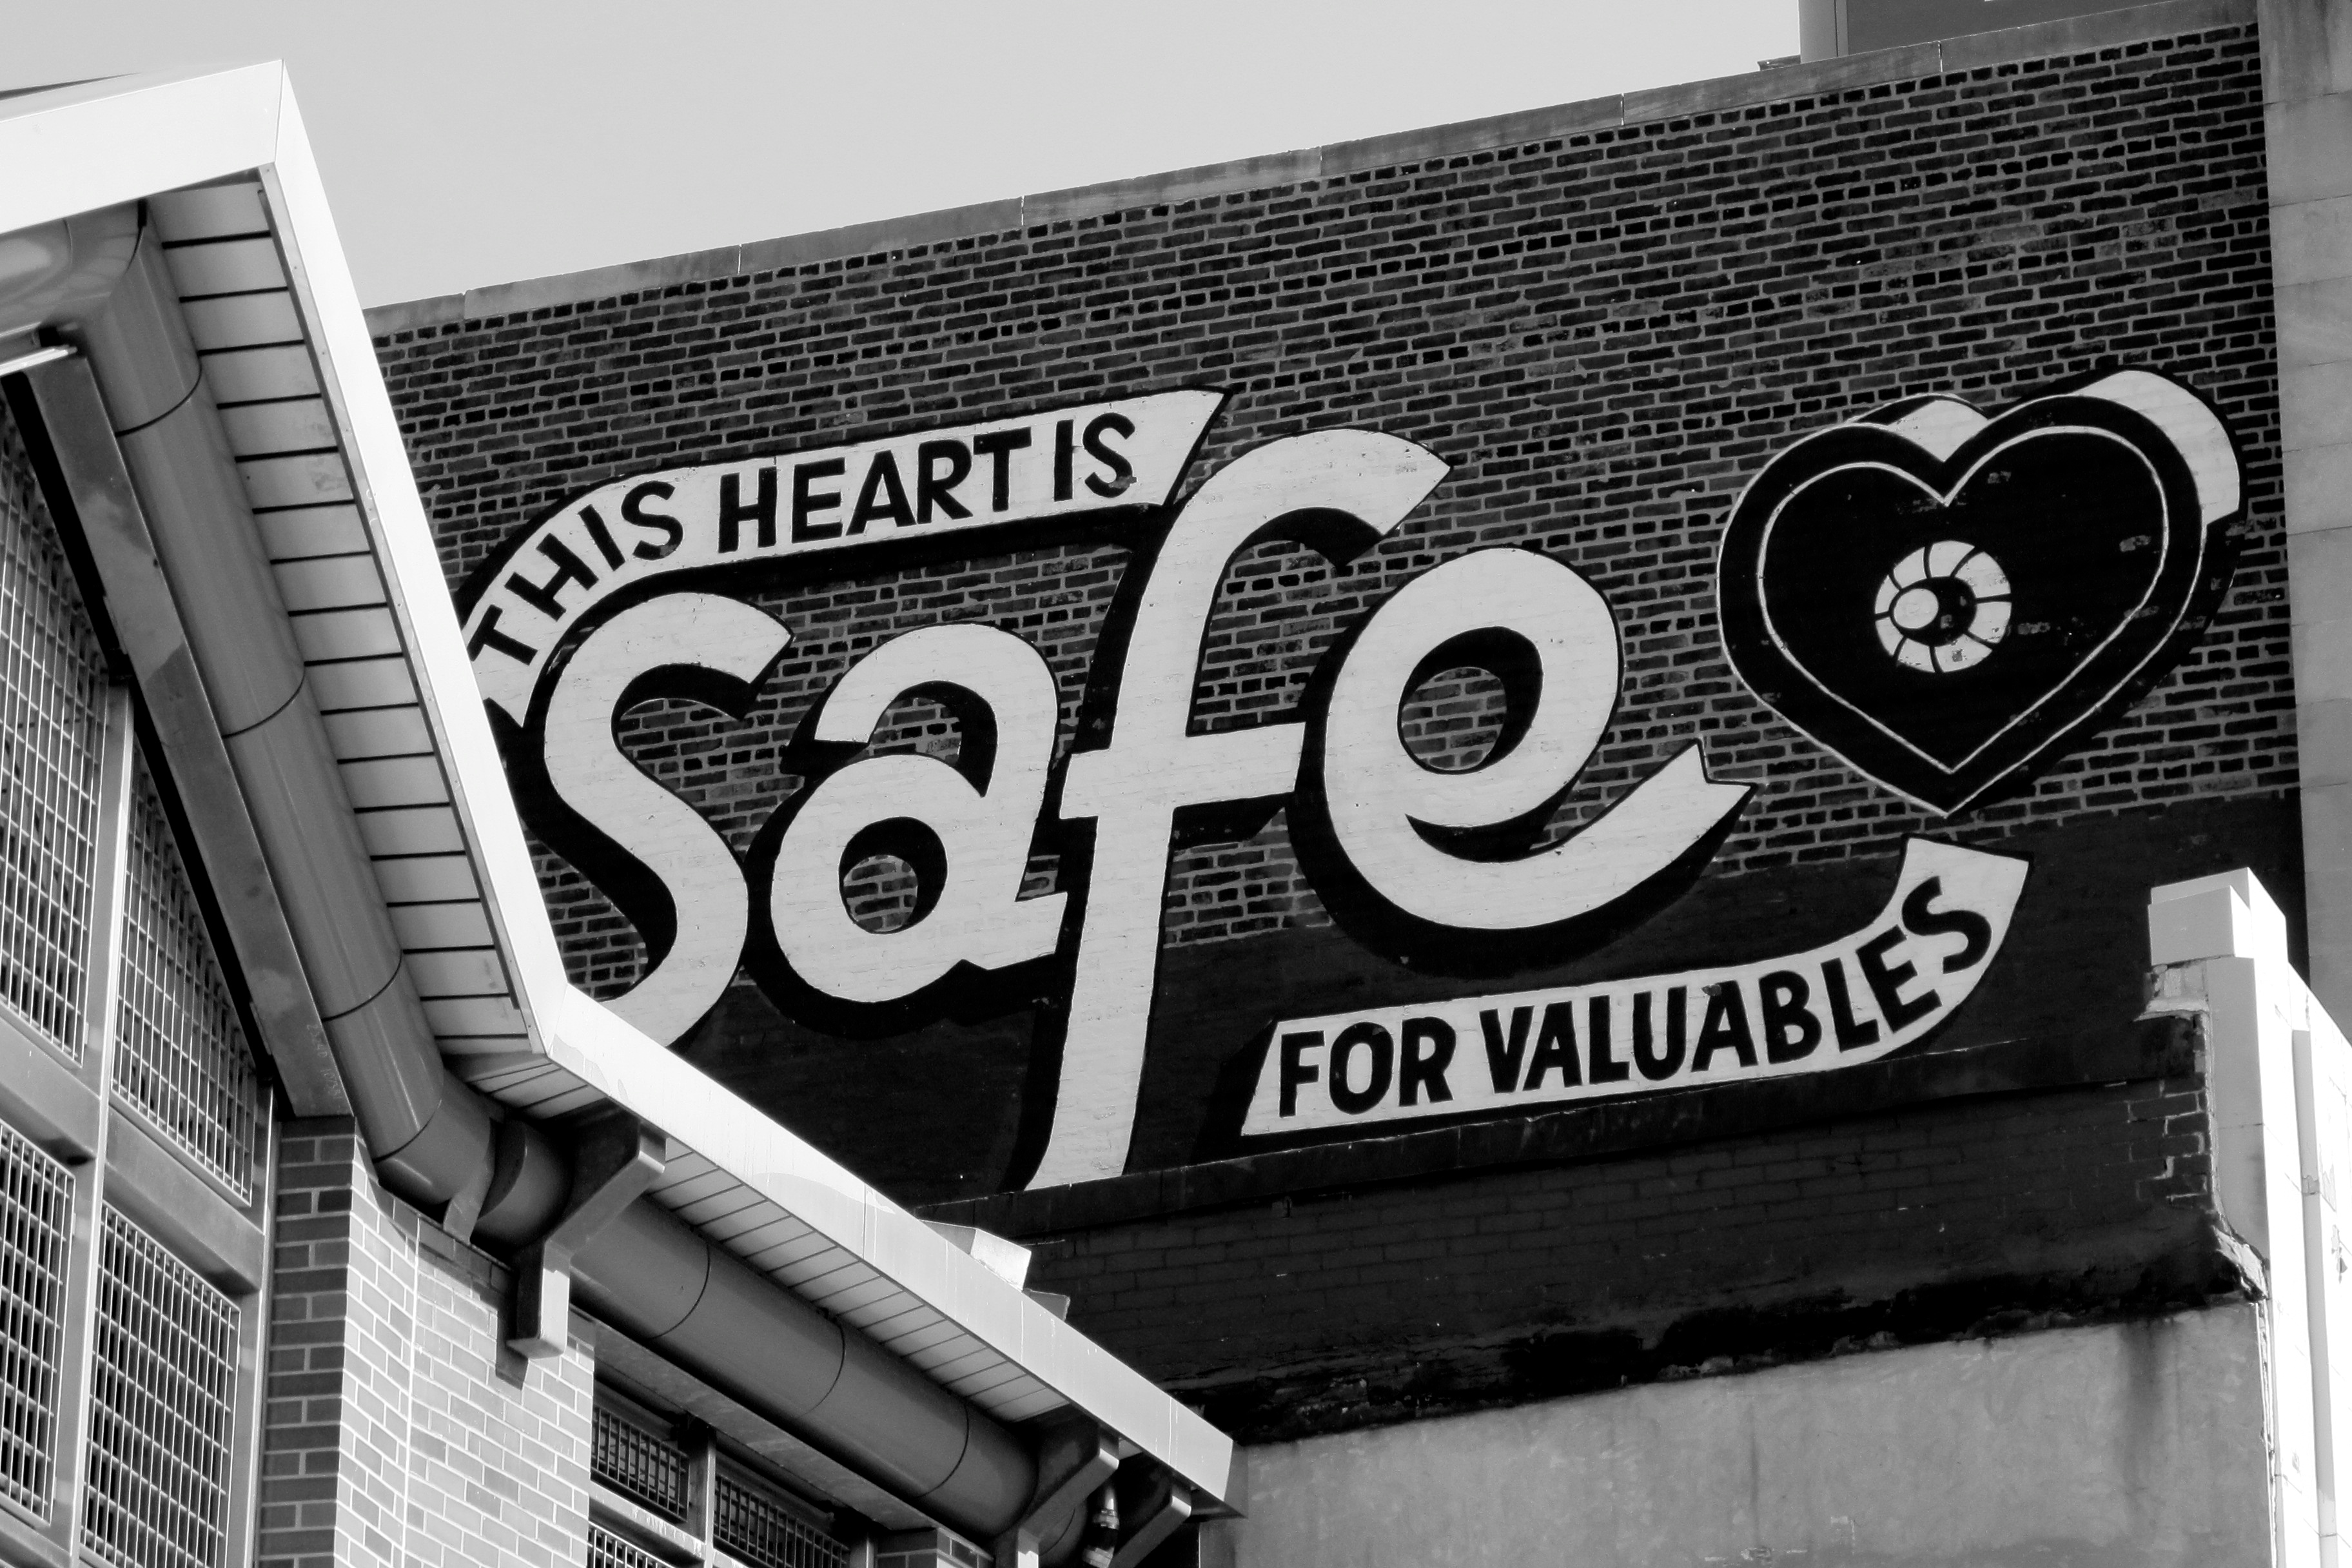 This heart is safe for valuables.